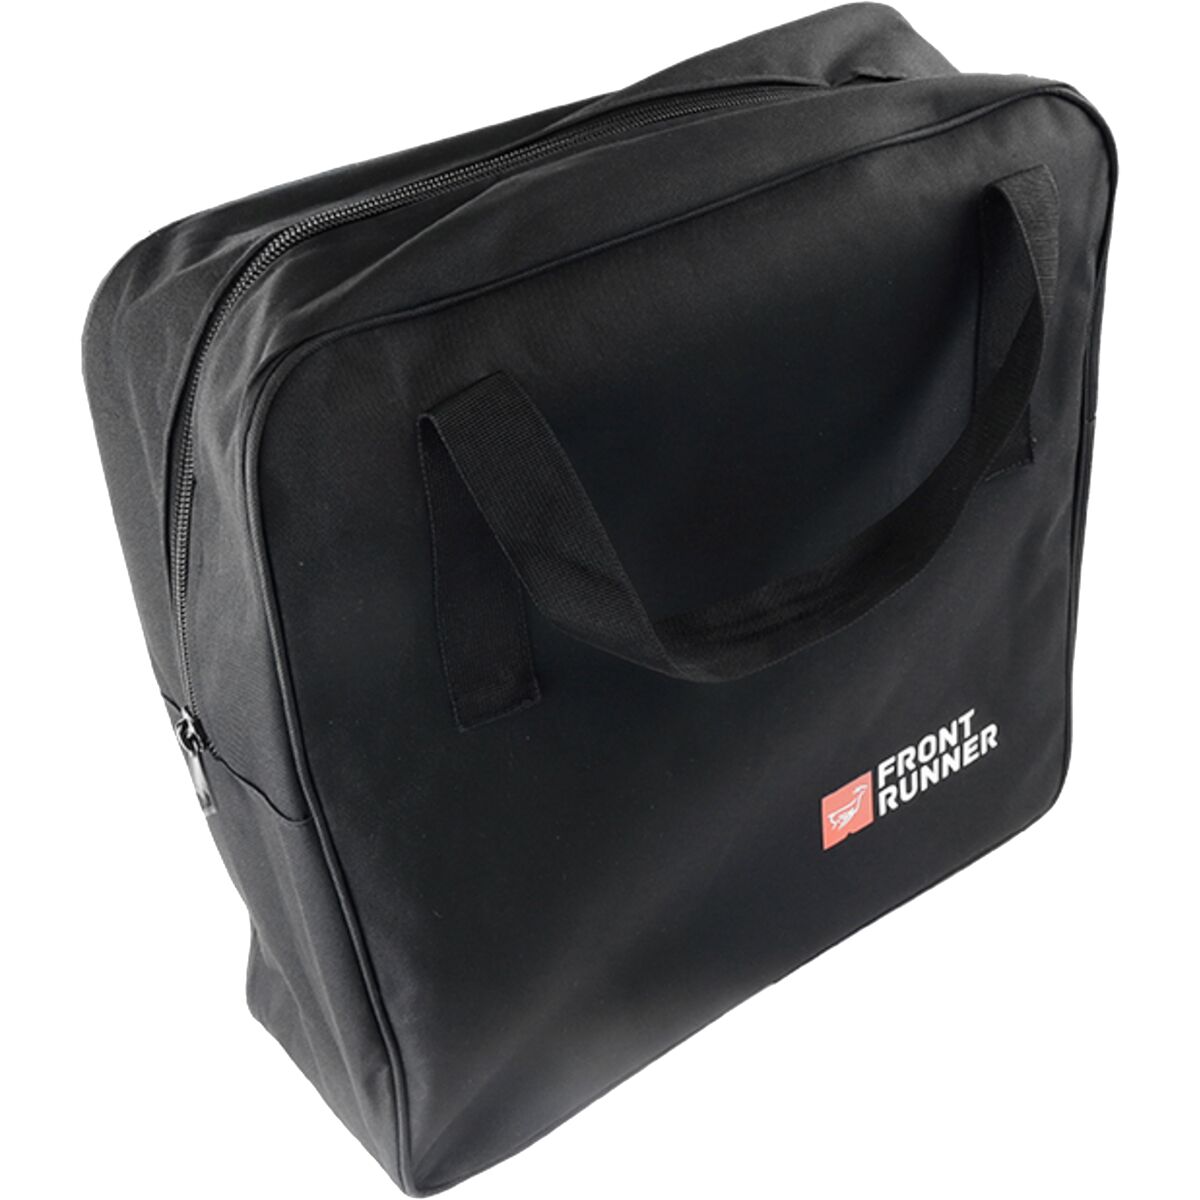 FrontRunner Expander Chair Double Storage Bag